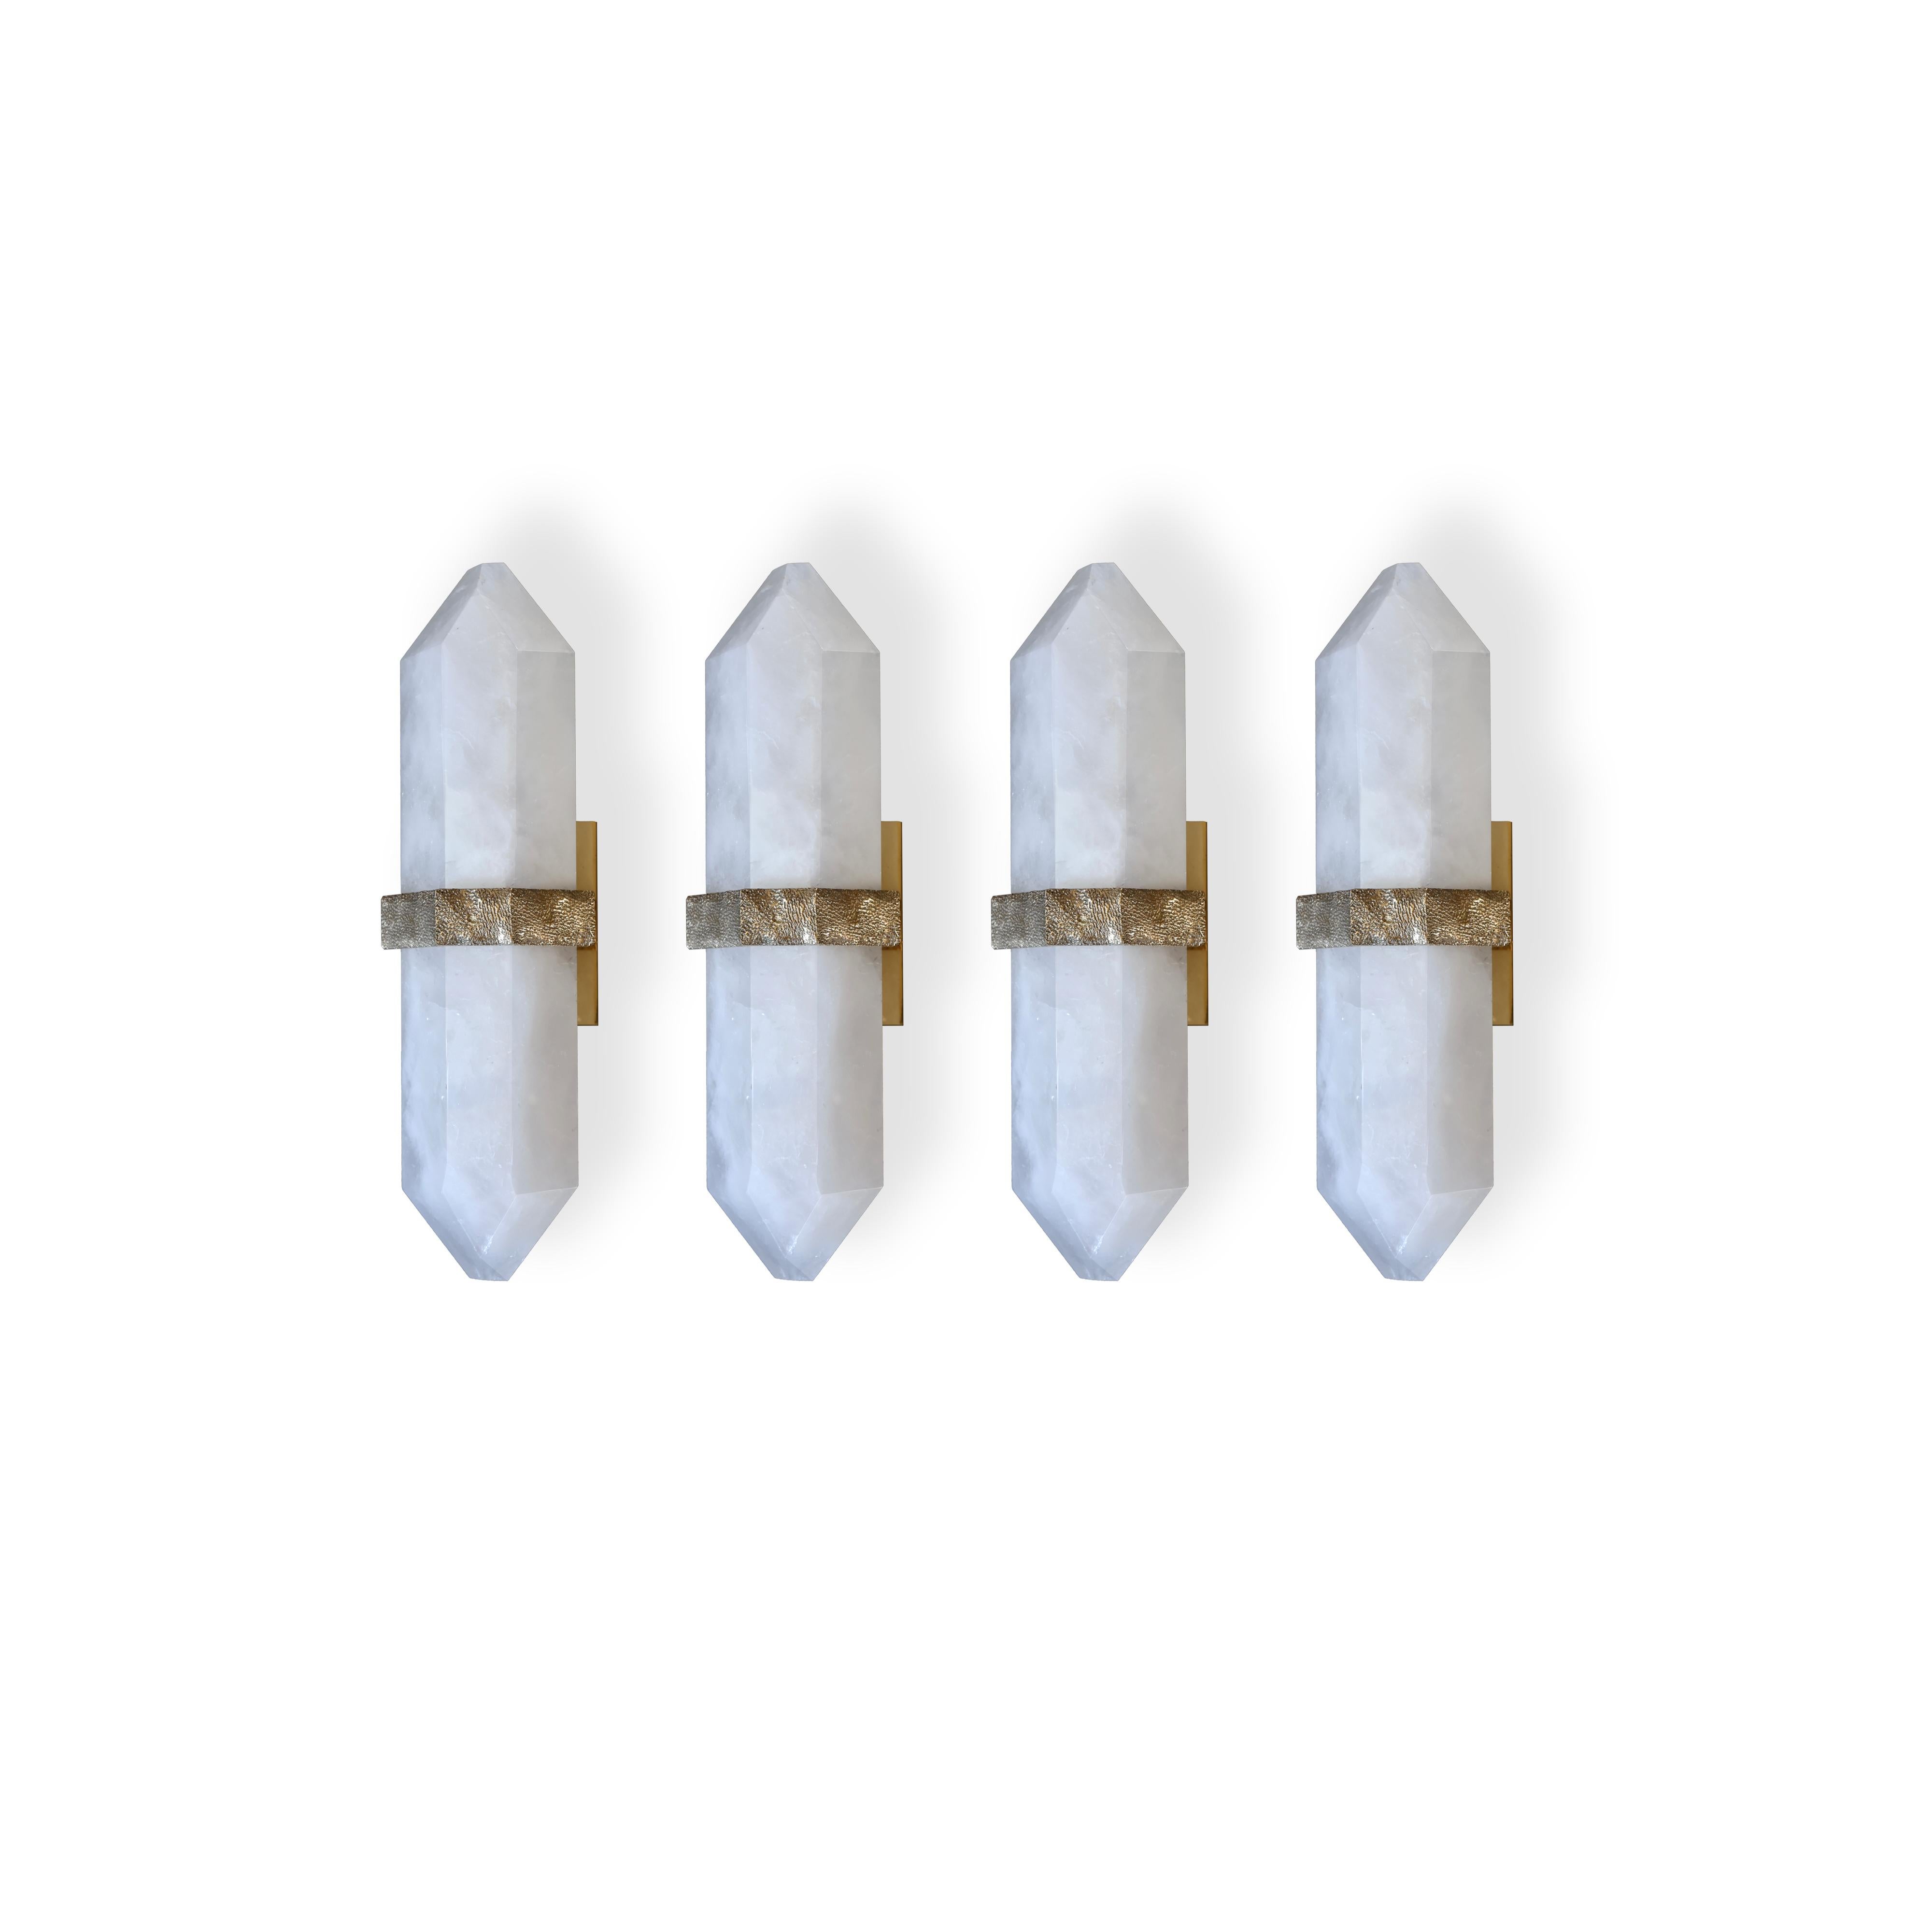 Group of Four fine carved diamond form rock crystal quartz wall sconces, mount with rich texture of cast brass decoration, created by Phoenix Gallery NYC. 
Custom size, finish, and quantity upon request. 
Each sconce installed two sockets, and